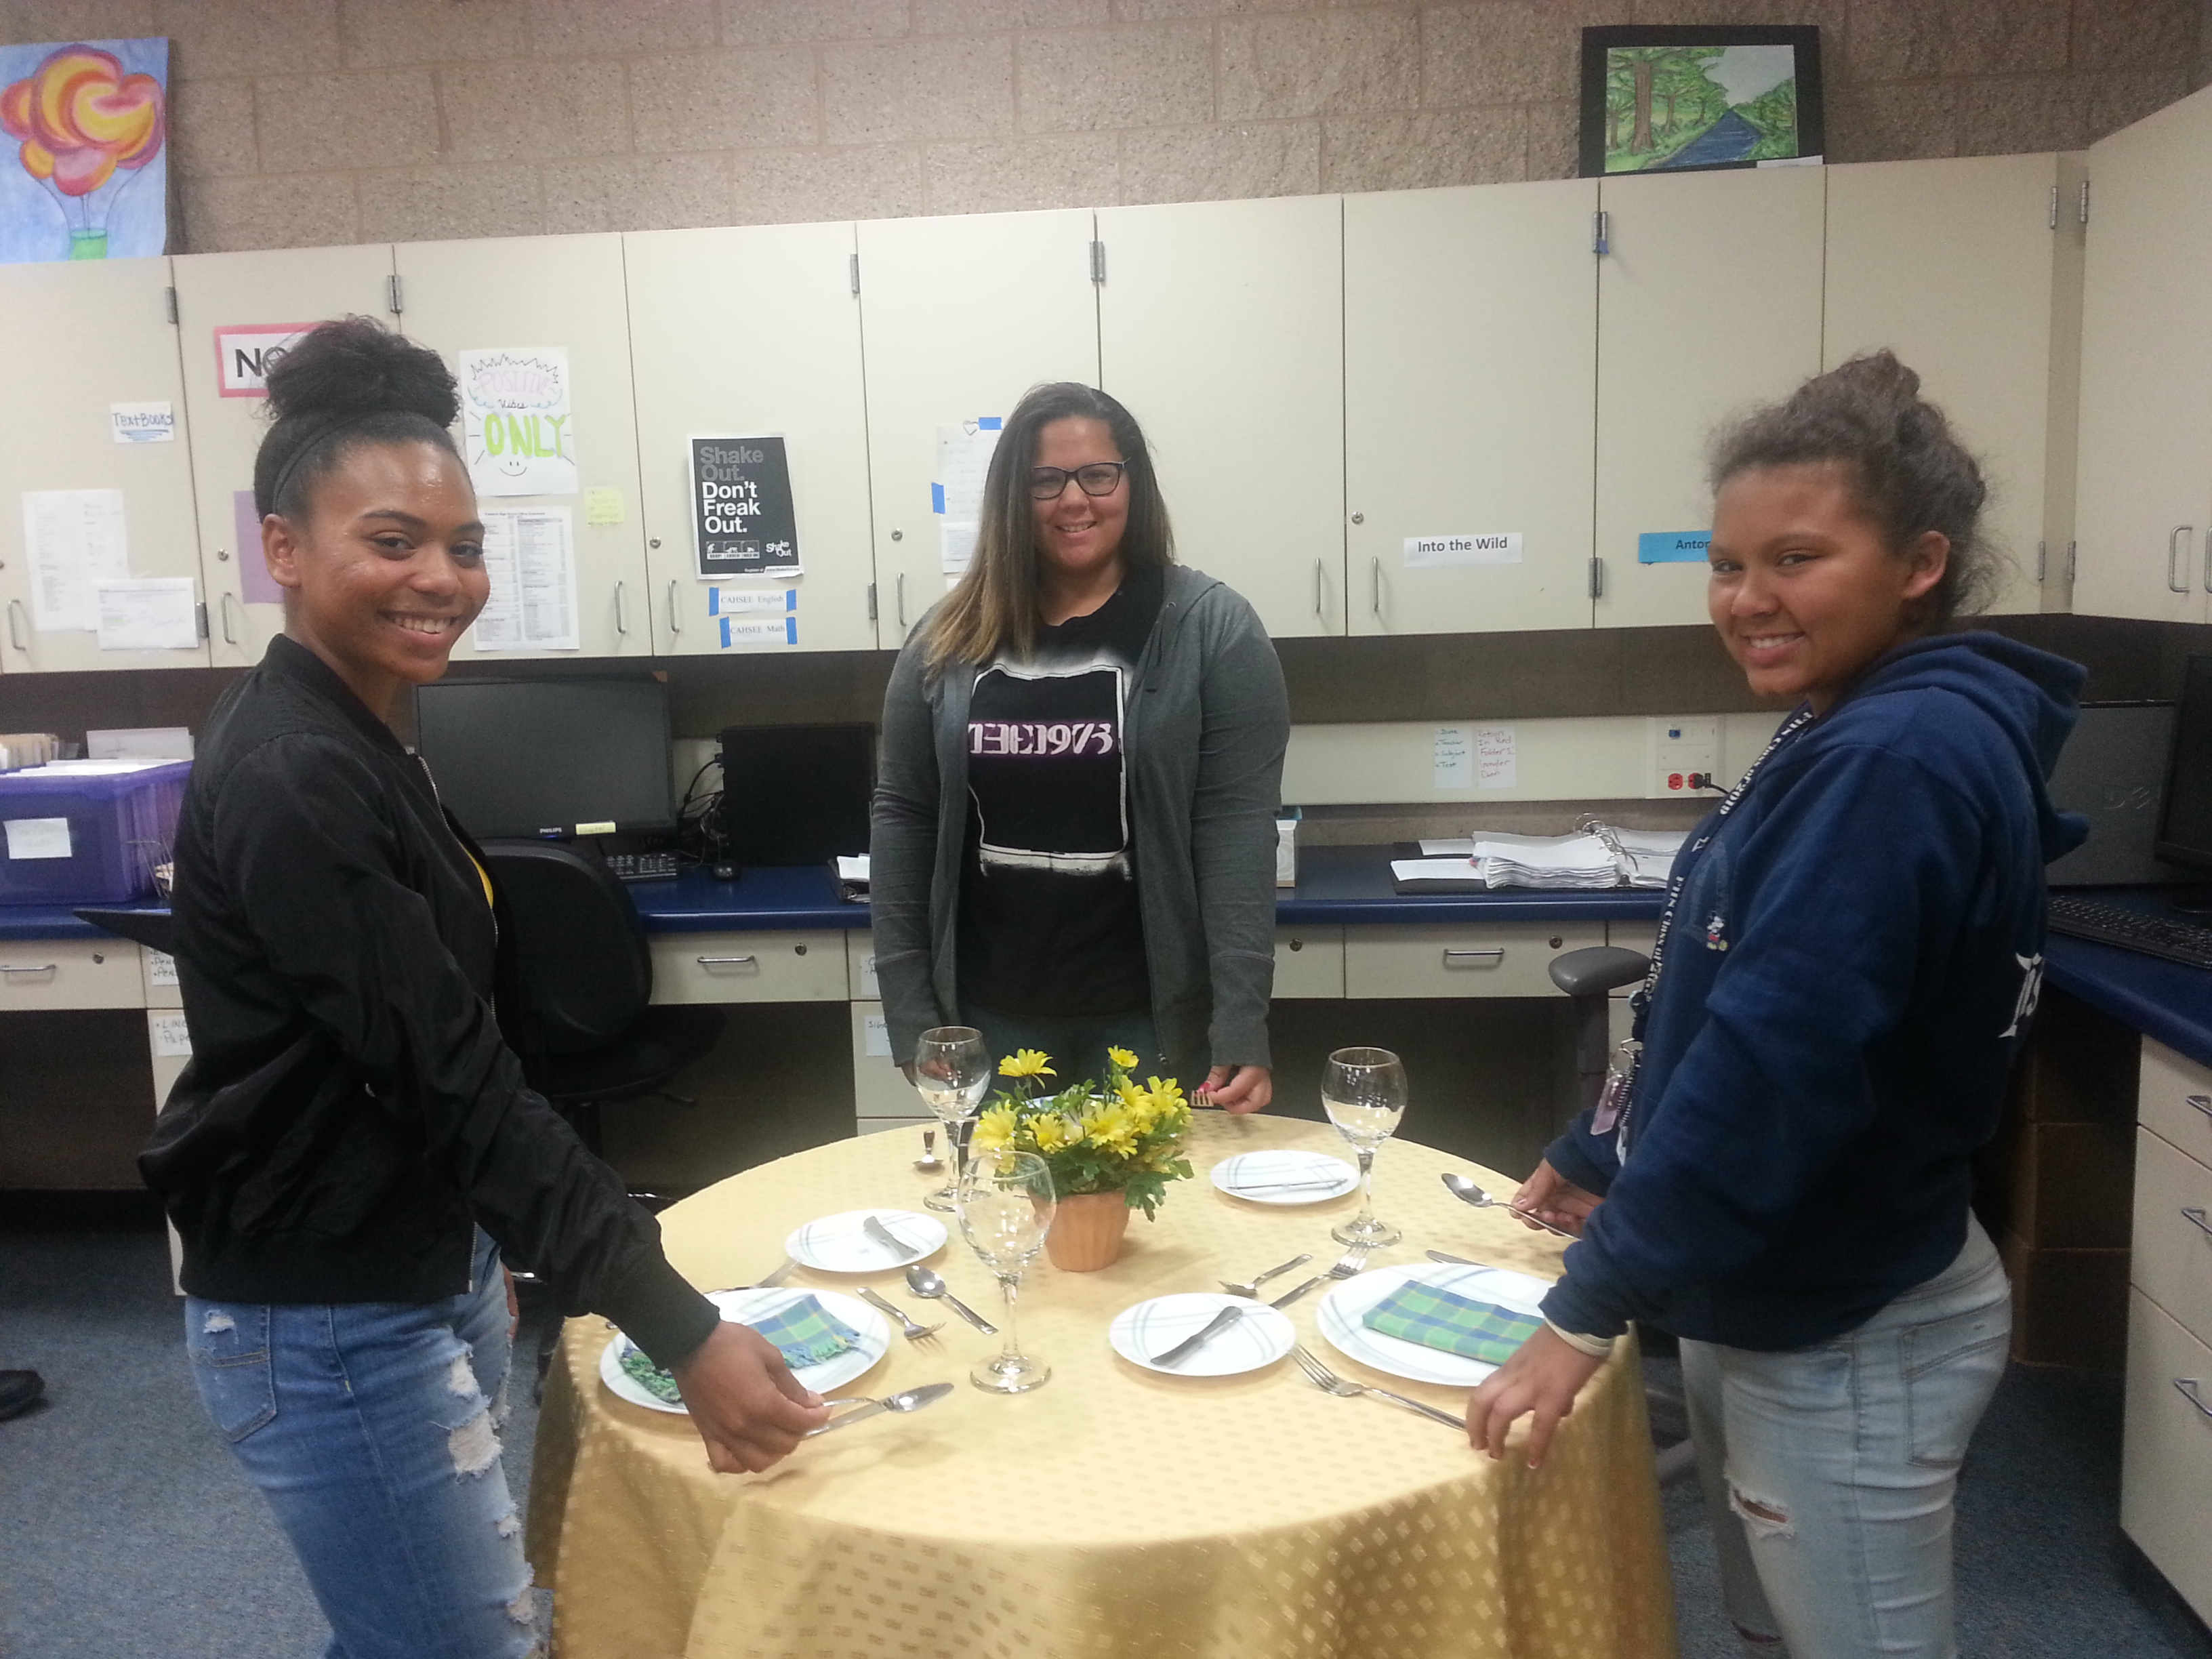 Etiquette classes at Freedom High in Oakley teach students life skills